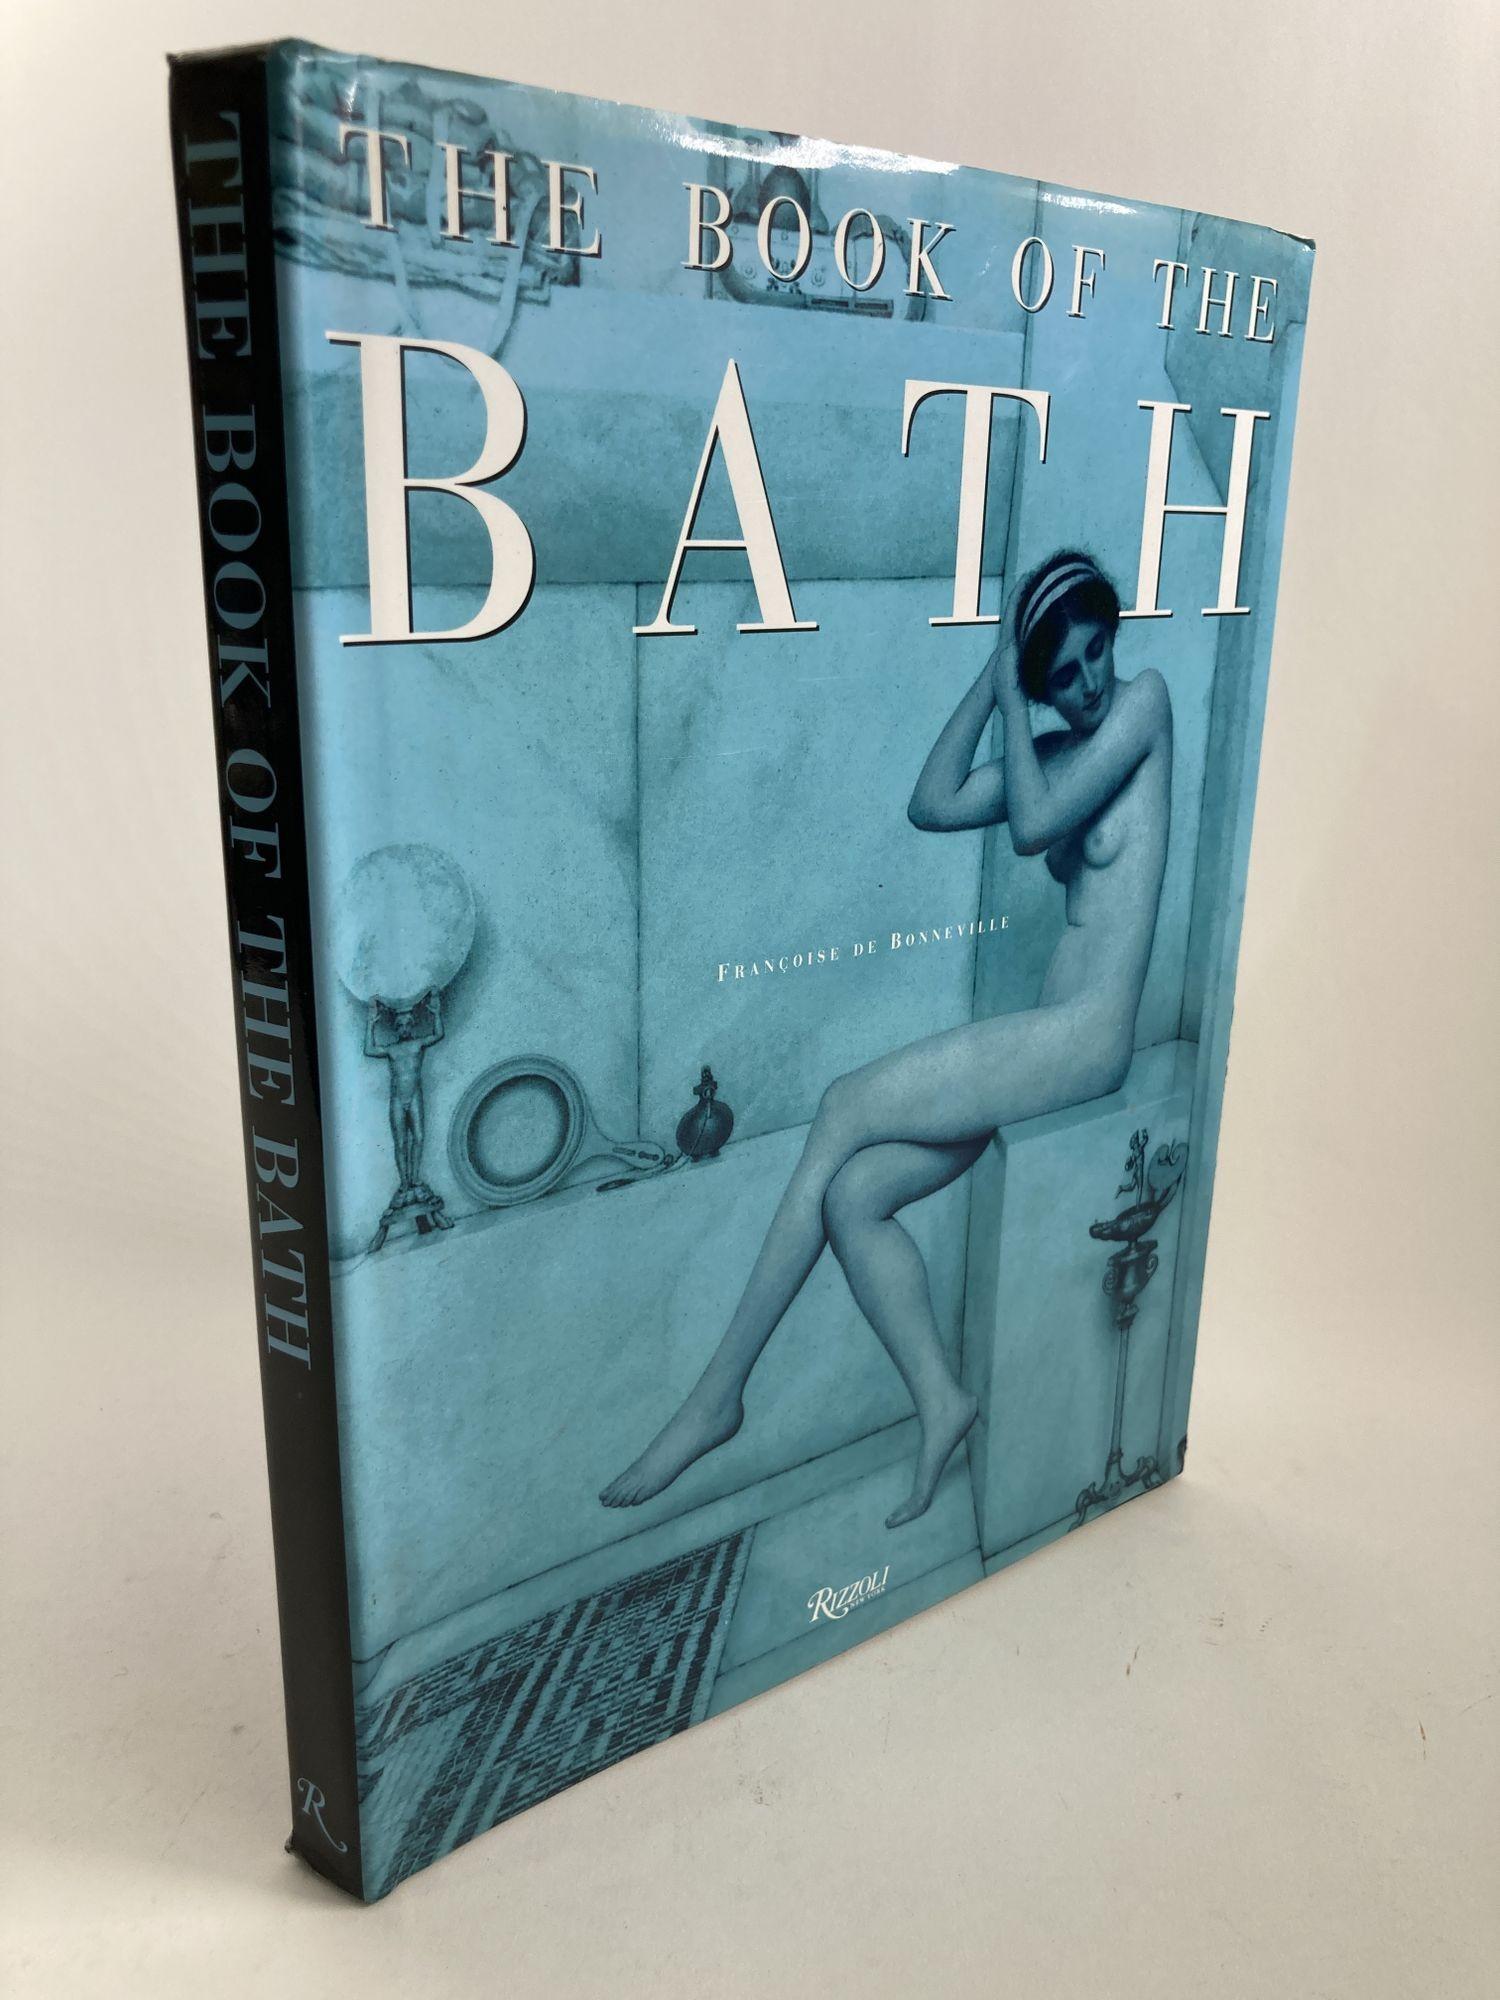 The Book of the Bath Hardcover – October 15, 1998 by Francoise De Bonneville (Author) published by Rizzoli.
1st edition, 1st printing, 1998.
For over 2000 years, in the Far East as in the West, bathing and showering have been more than practical